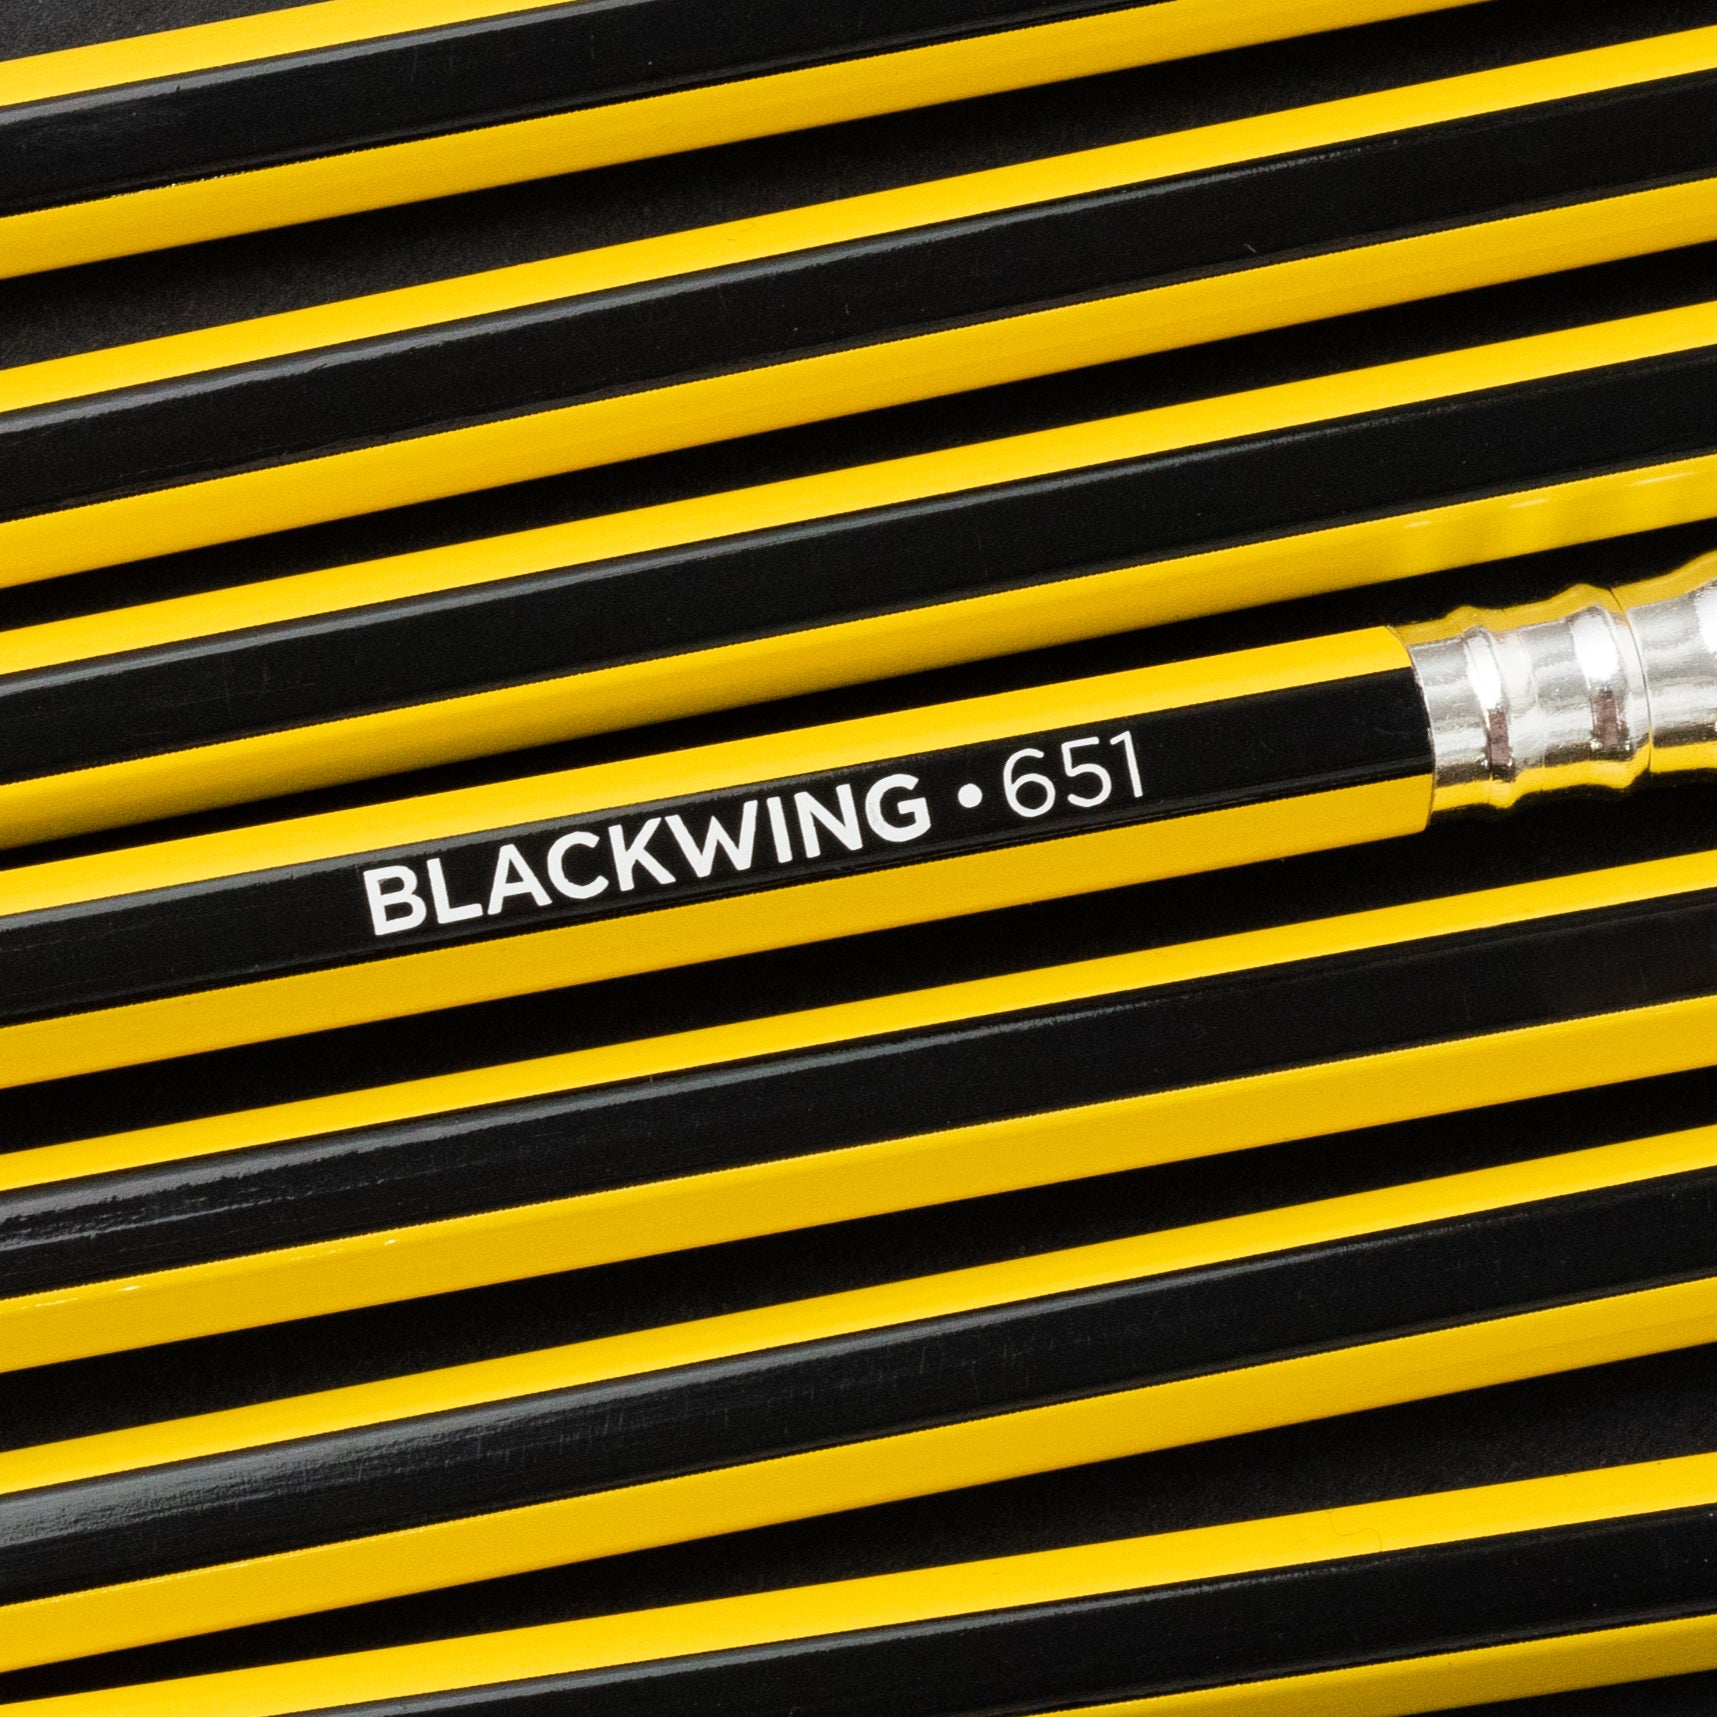 A group of Blackwing Volume 651 (Set of 12) pencils with the word blackwing on them, inspired by Bruce Lee.